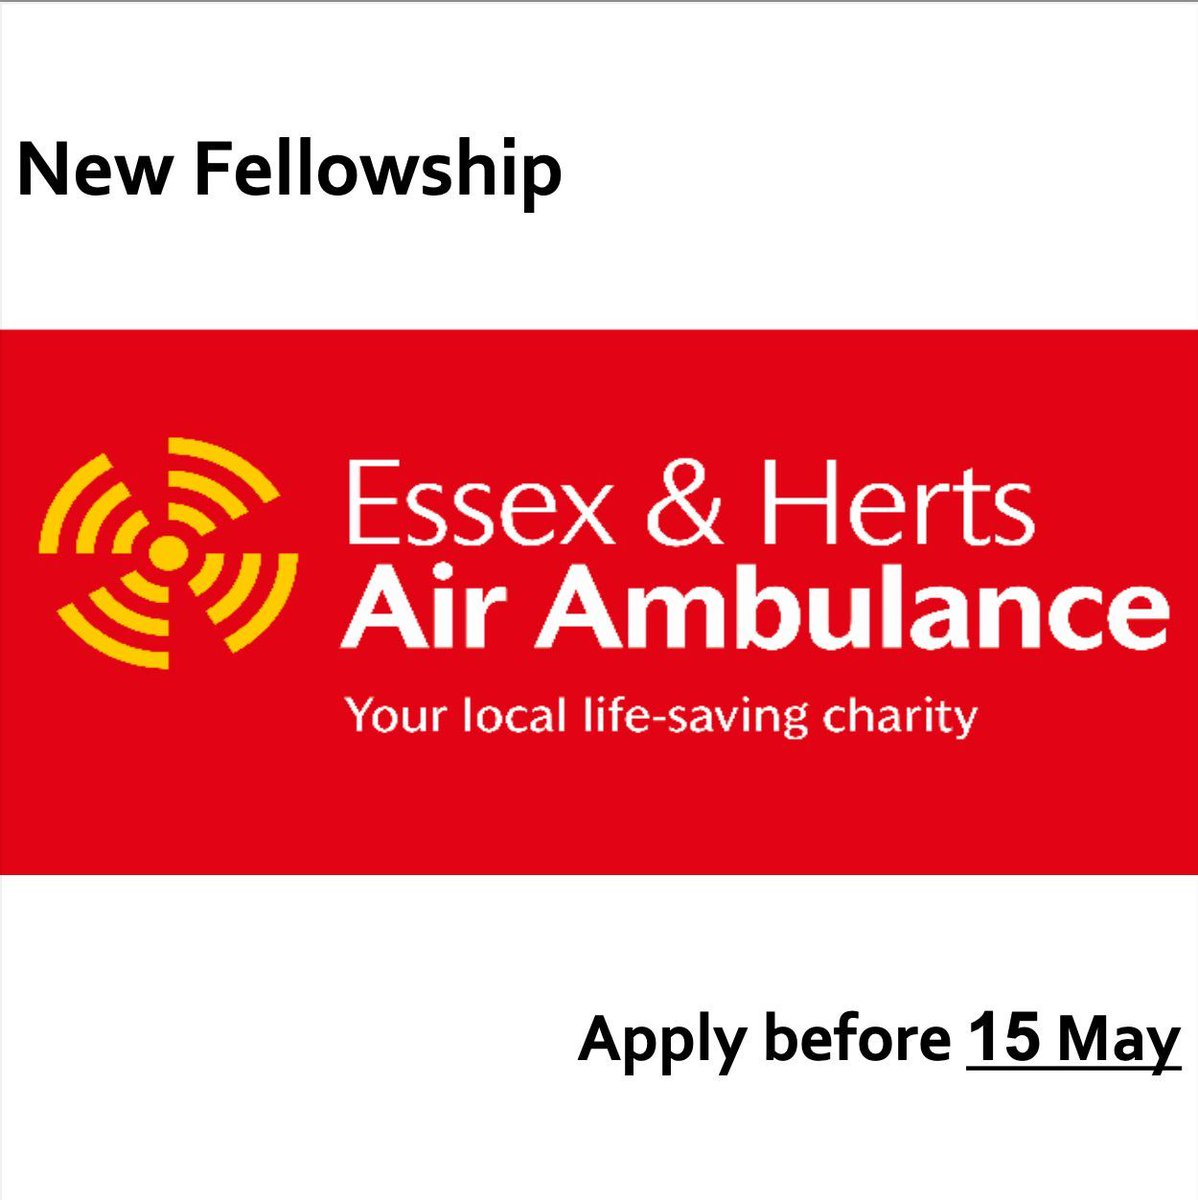 Fellowship in Virtual Reality for Prehospital Medicine 🚁🚨
Essex and Herts Air Ambulance are looking for an exceptionally motivated individual to join their team. Closing date is 15 May. ➡️ To read more visit: buff.ly/3QzedEk and buff.ly/3UO7ysb.